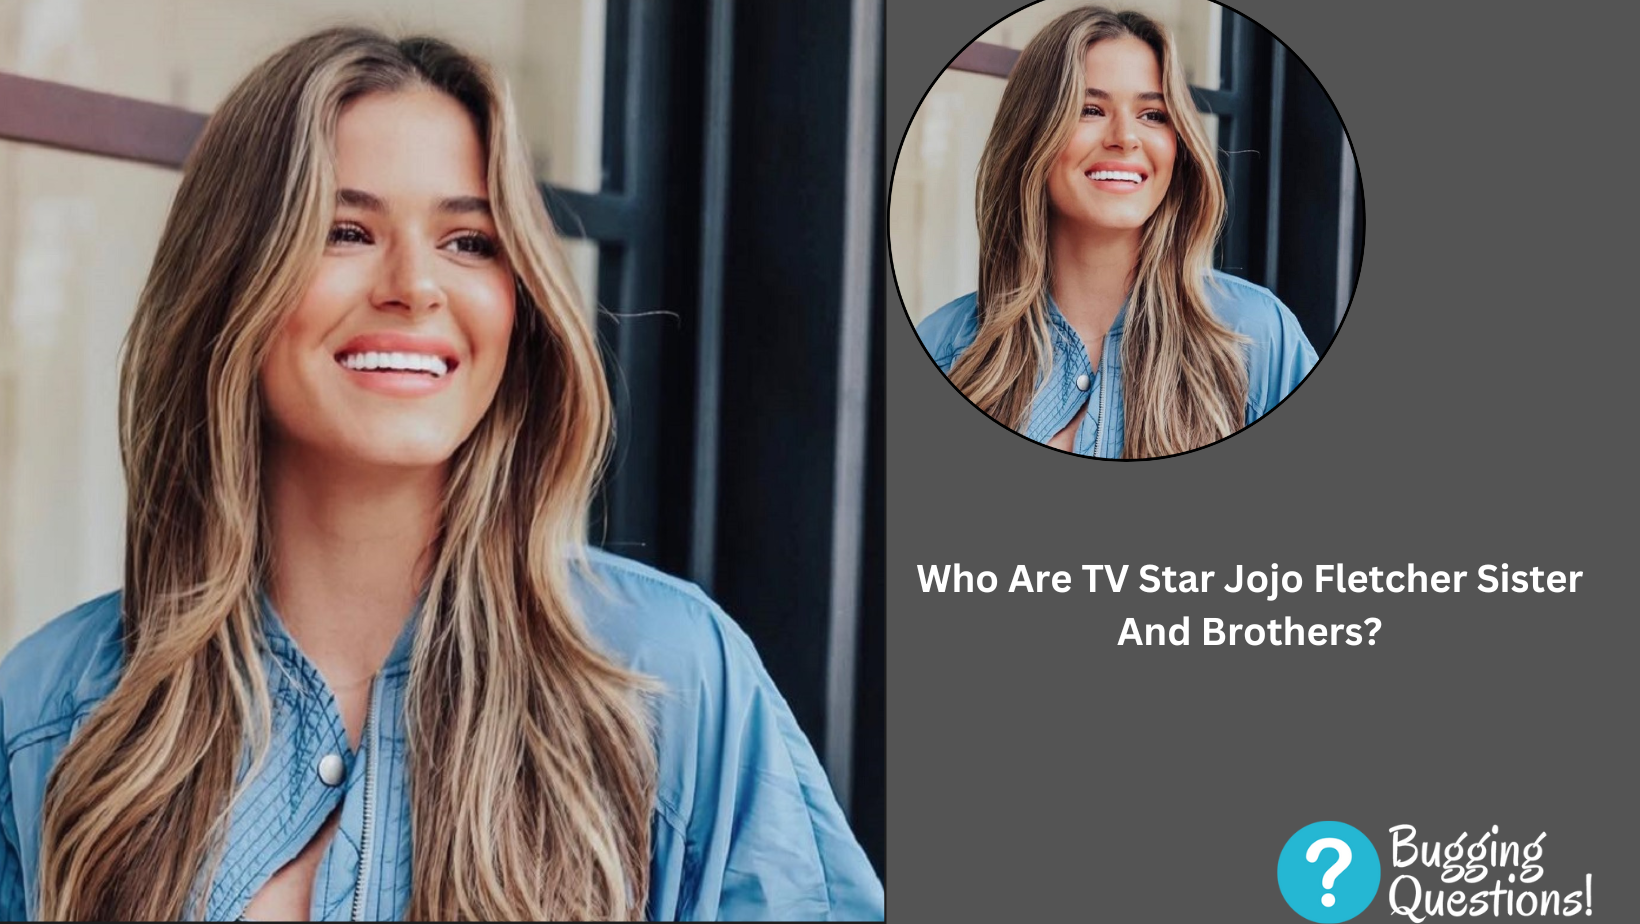 Who Are TV Star Jojo Fletcher Sister And Brothers?